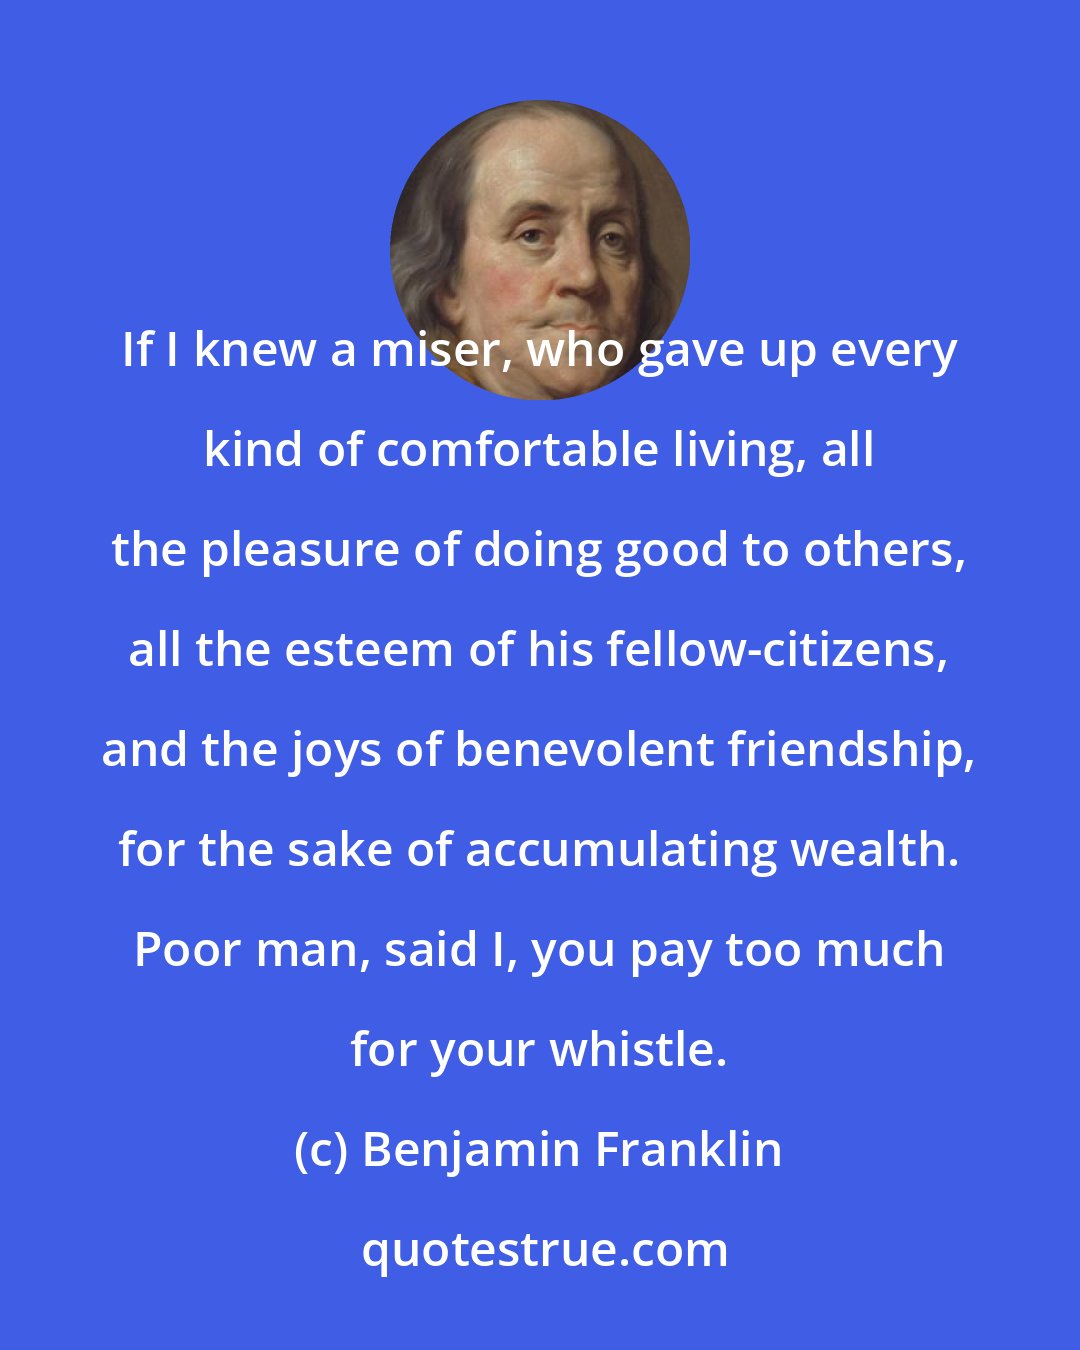 Benjamin Franklin: If I knew a miser, who gave up every kind of comfortable living, all the pleasure of doing good to others, all the esteem of his fellow-citizens, and the joys of benevolent friendship, for the sake of accumulating wealth. Poor man, said I, you pay too much for your whistle.